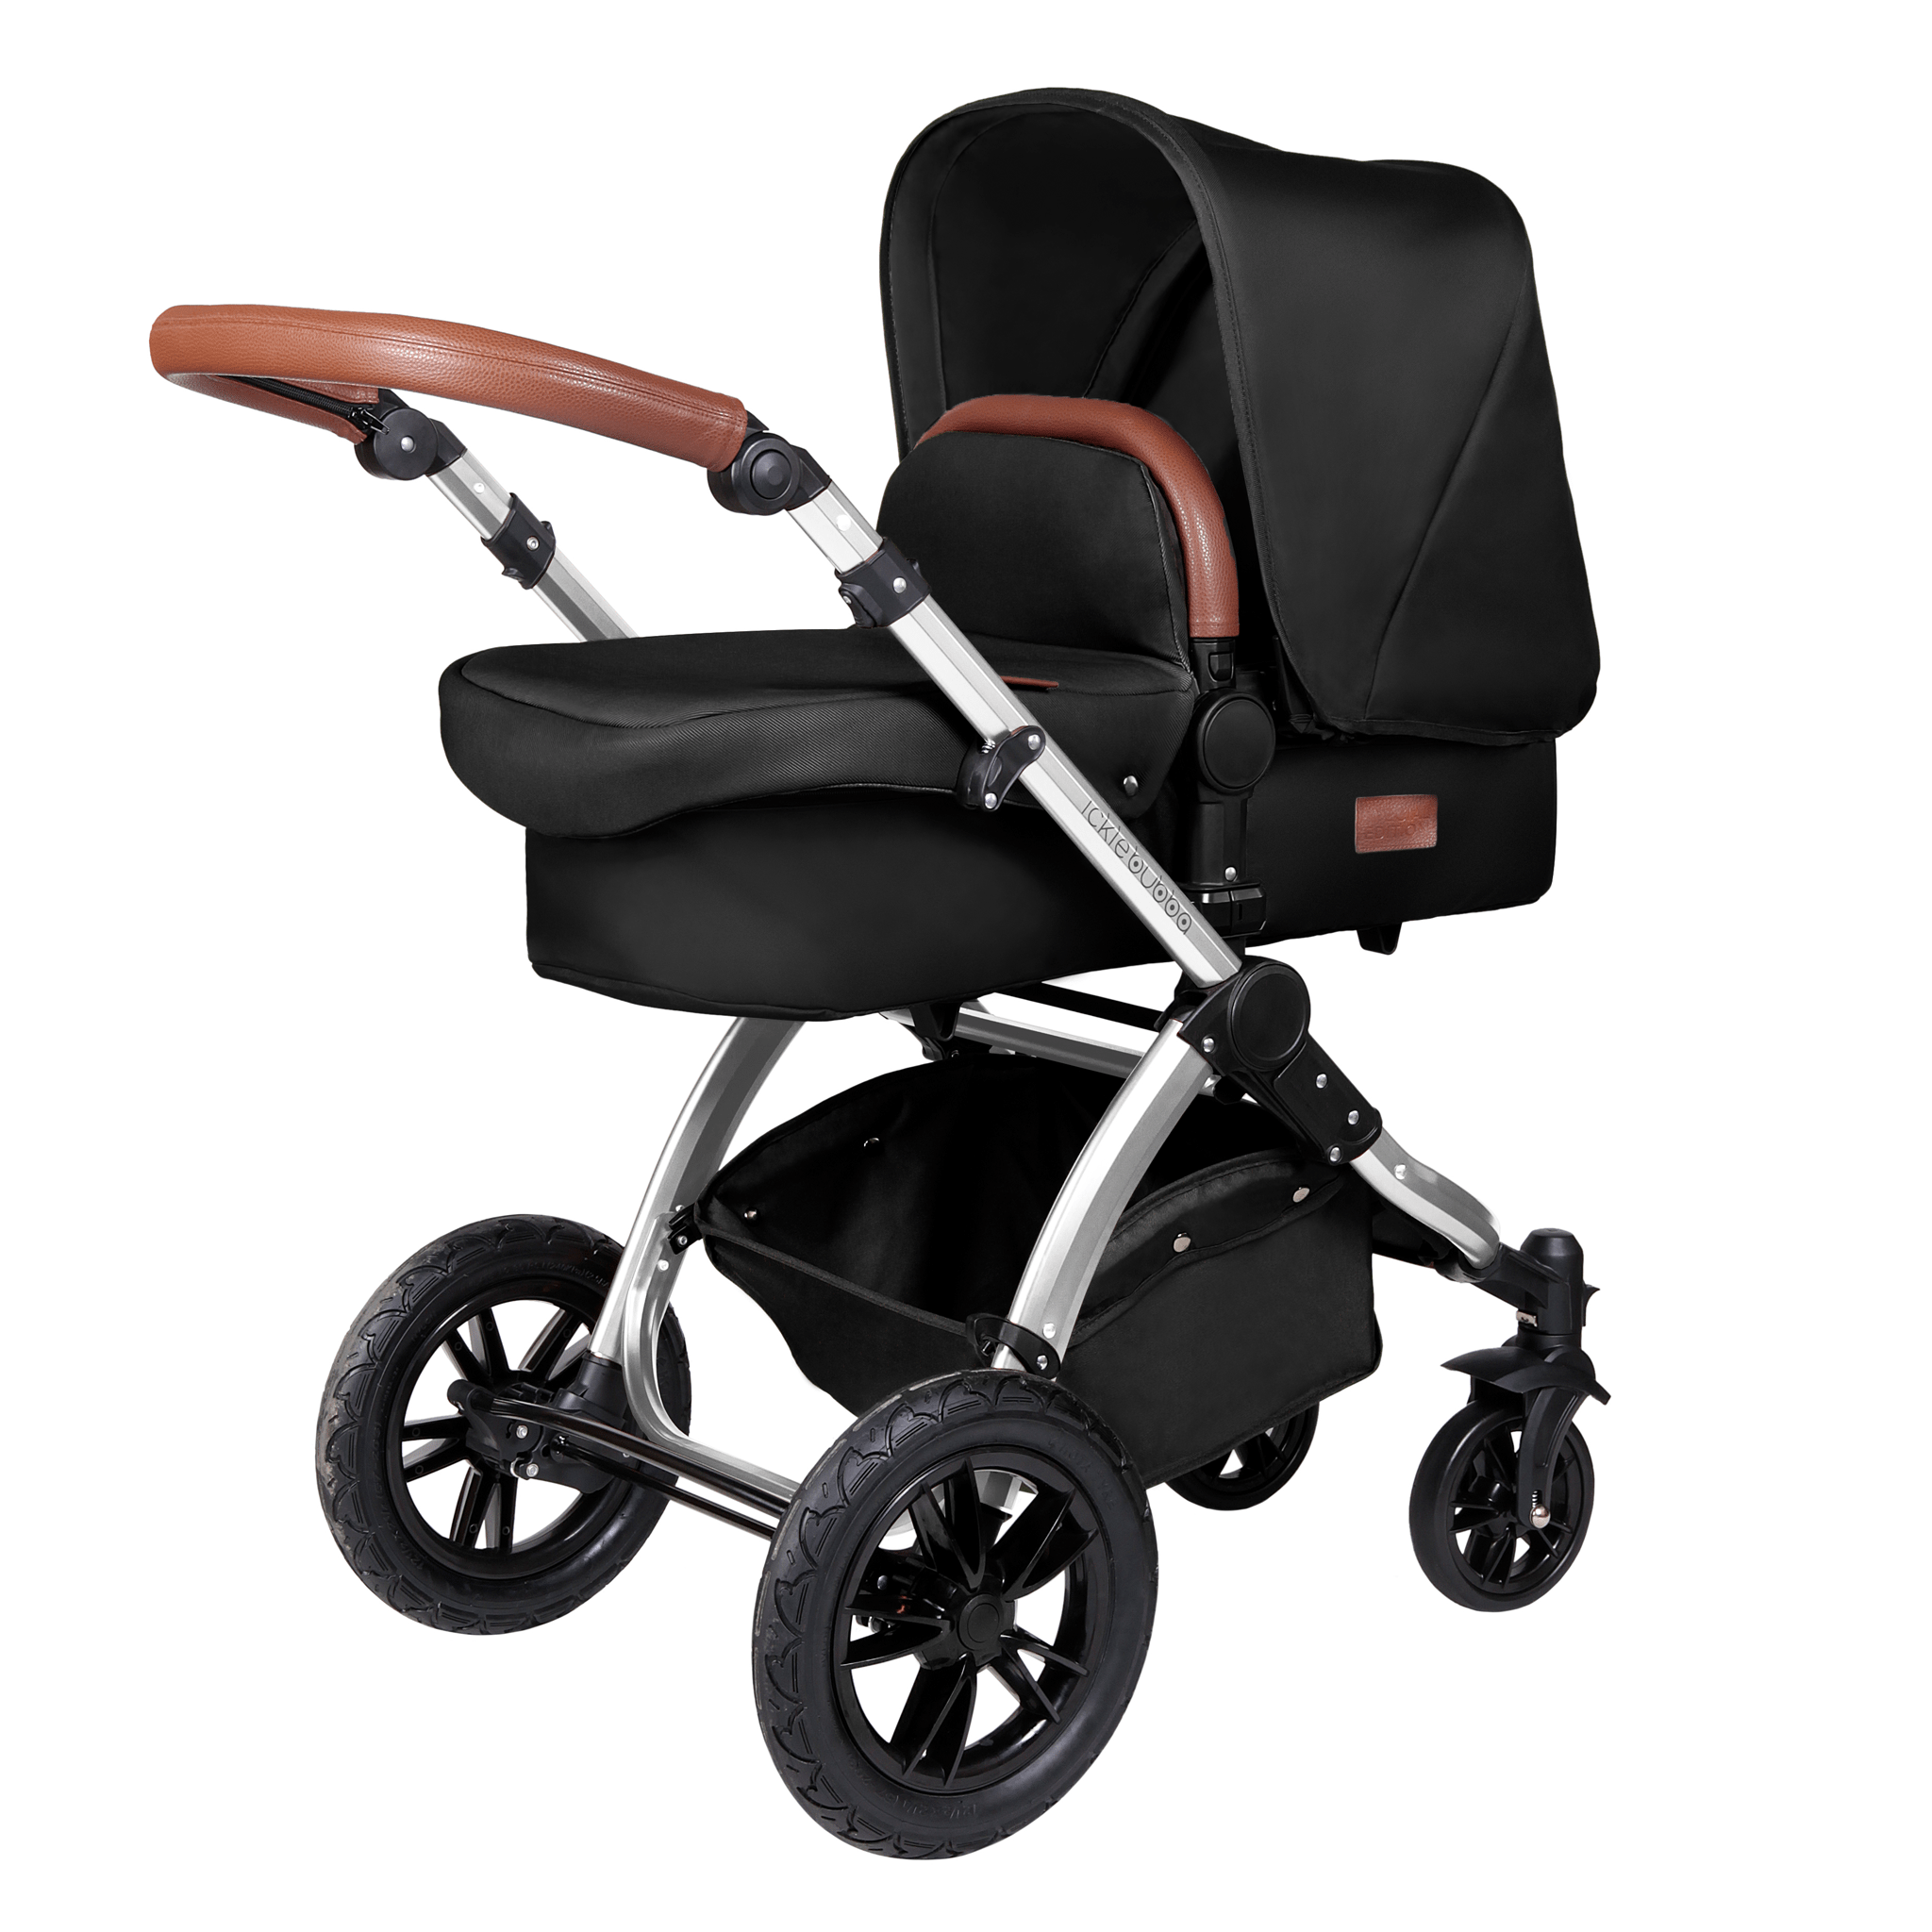 Ickle Bubba Stomp V4 2-in-1 Pushchair Chrome/Midnight Pushchairs & Buggies 10-004-000-027 0709016518775